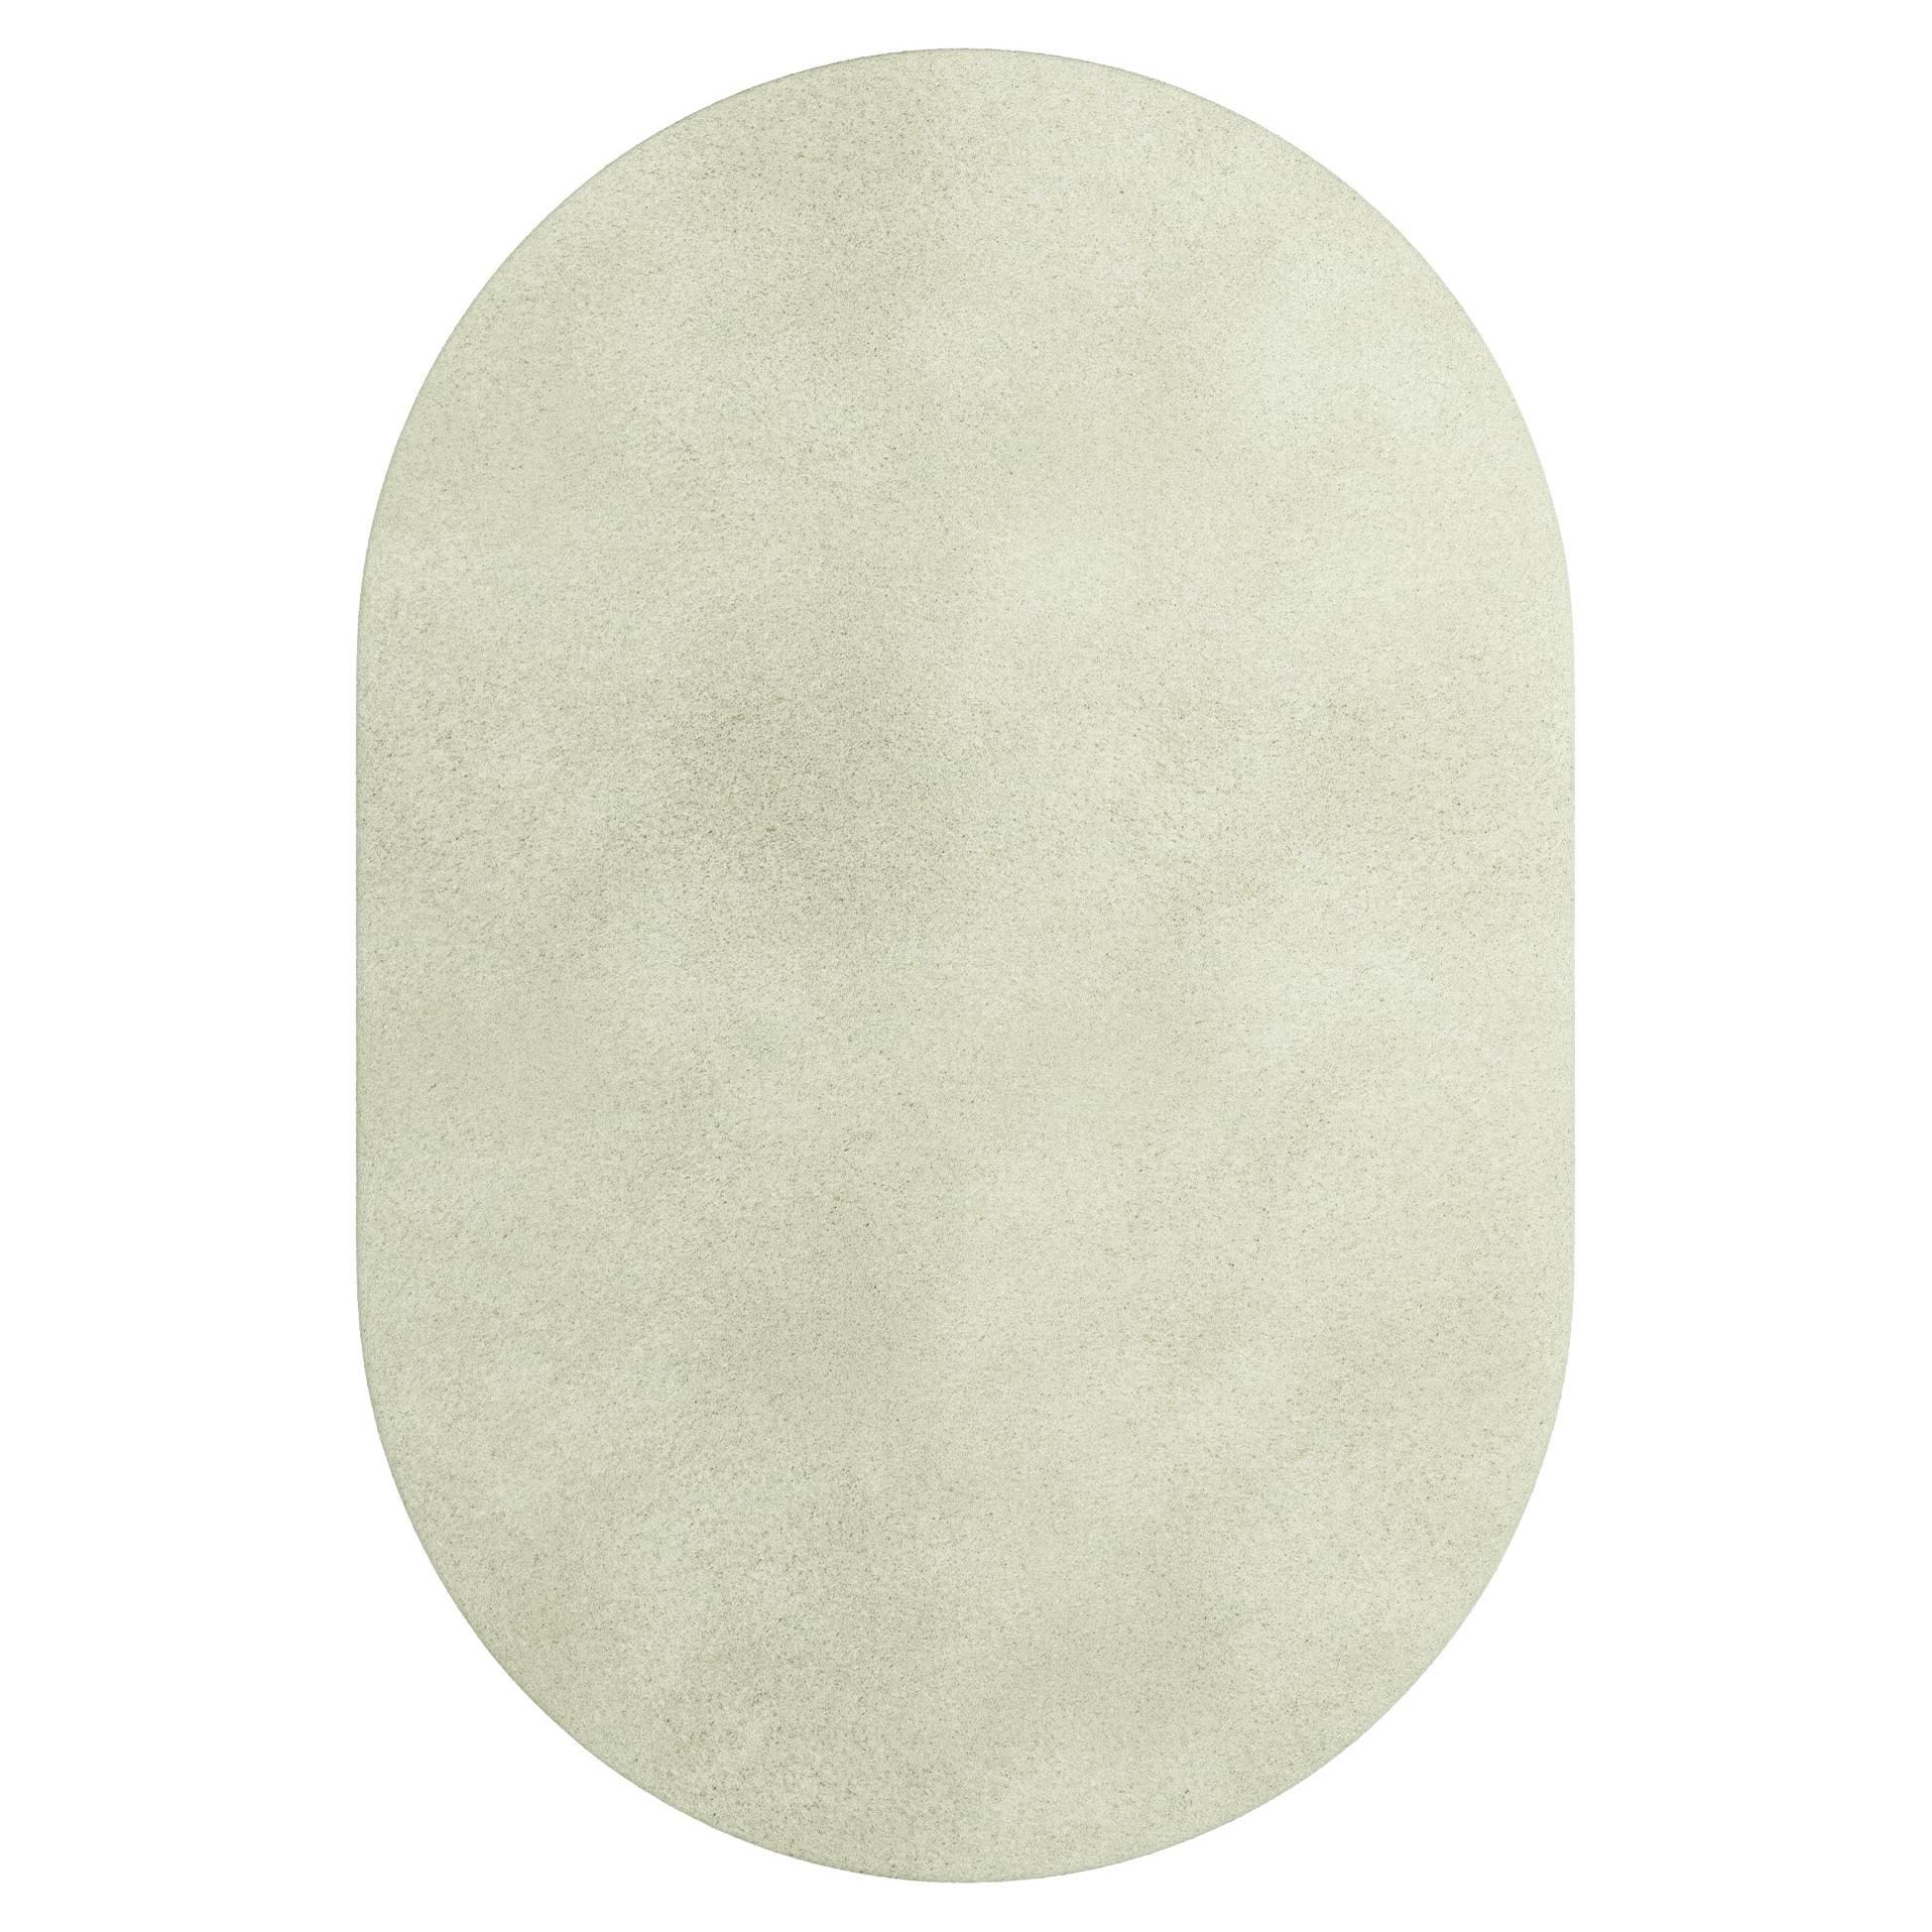 Contemporary Minimal Oval Shape Hand Tufted Botanical Silk Rug Light Green  For Sale At 1stdibs Inside Botanical Oval Rugs (View 7 of 15)